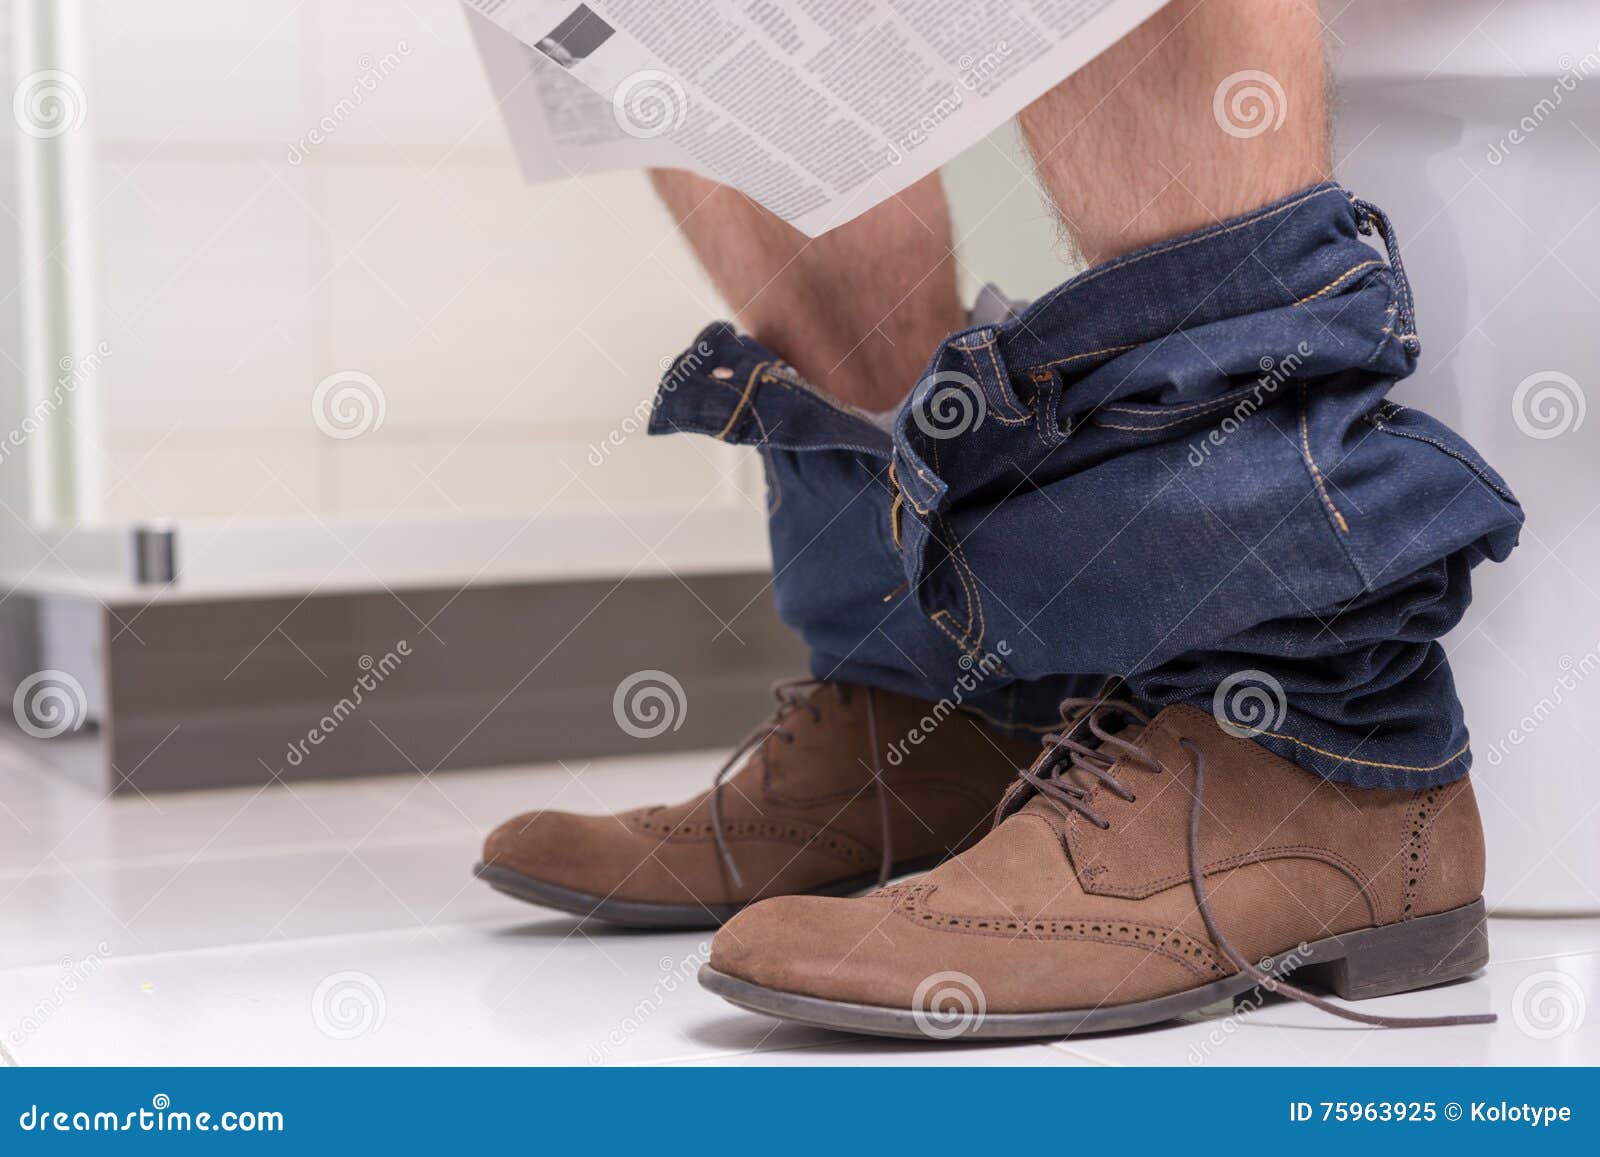 Male Reading Newspaper While Sitting On The Toilet Seat 